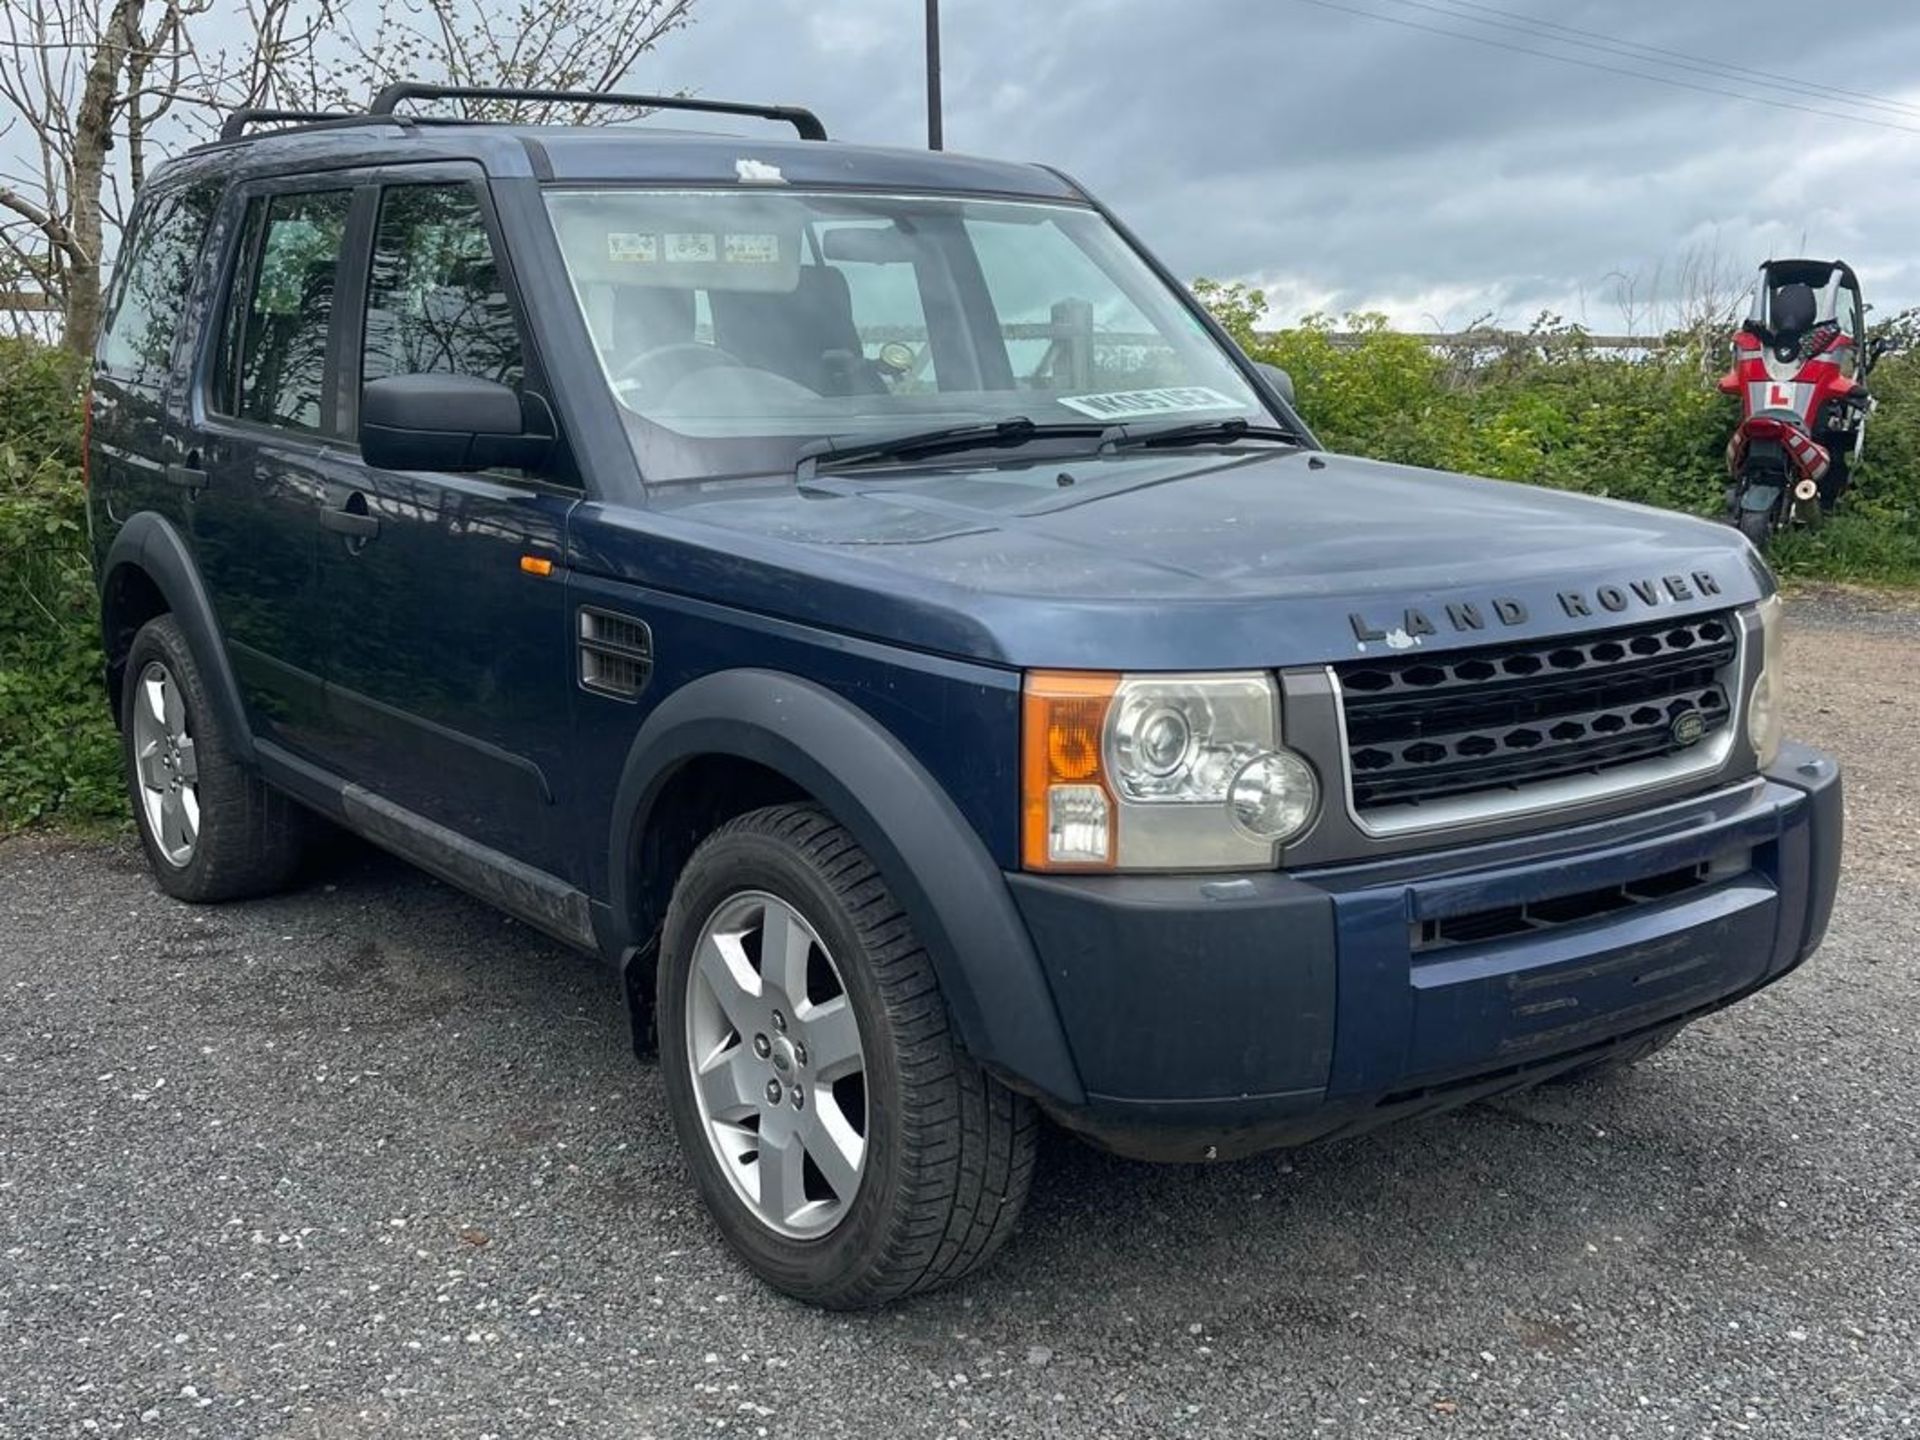 2005 Land Rover Discovery 3 Tdv6 S Auto - No Reserve - Image 4 of 14